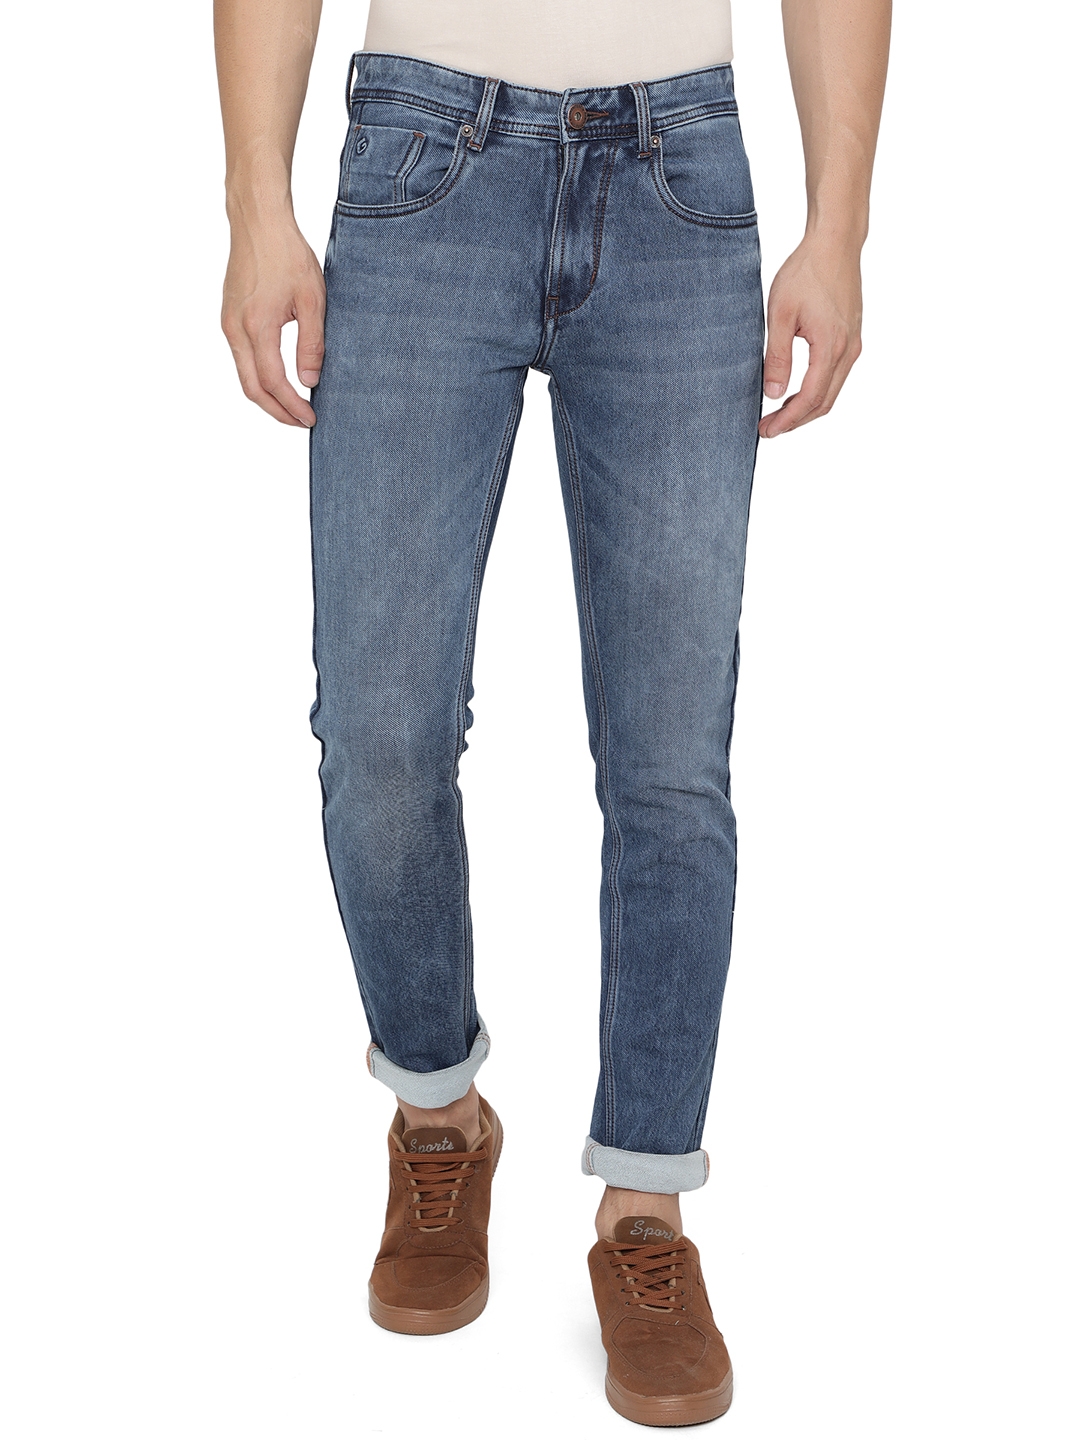 Greenfibre | Ink Blue Washed Narrow Fit Jeans | Greenfibre 0